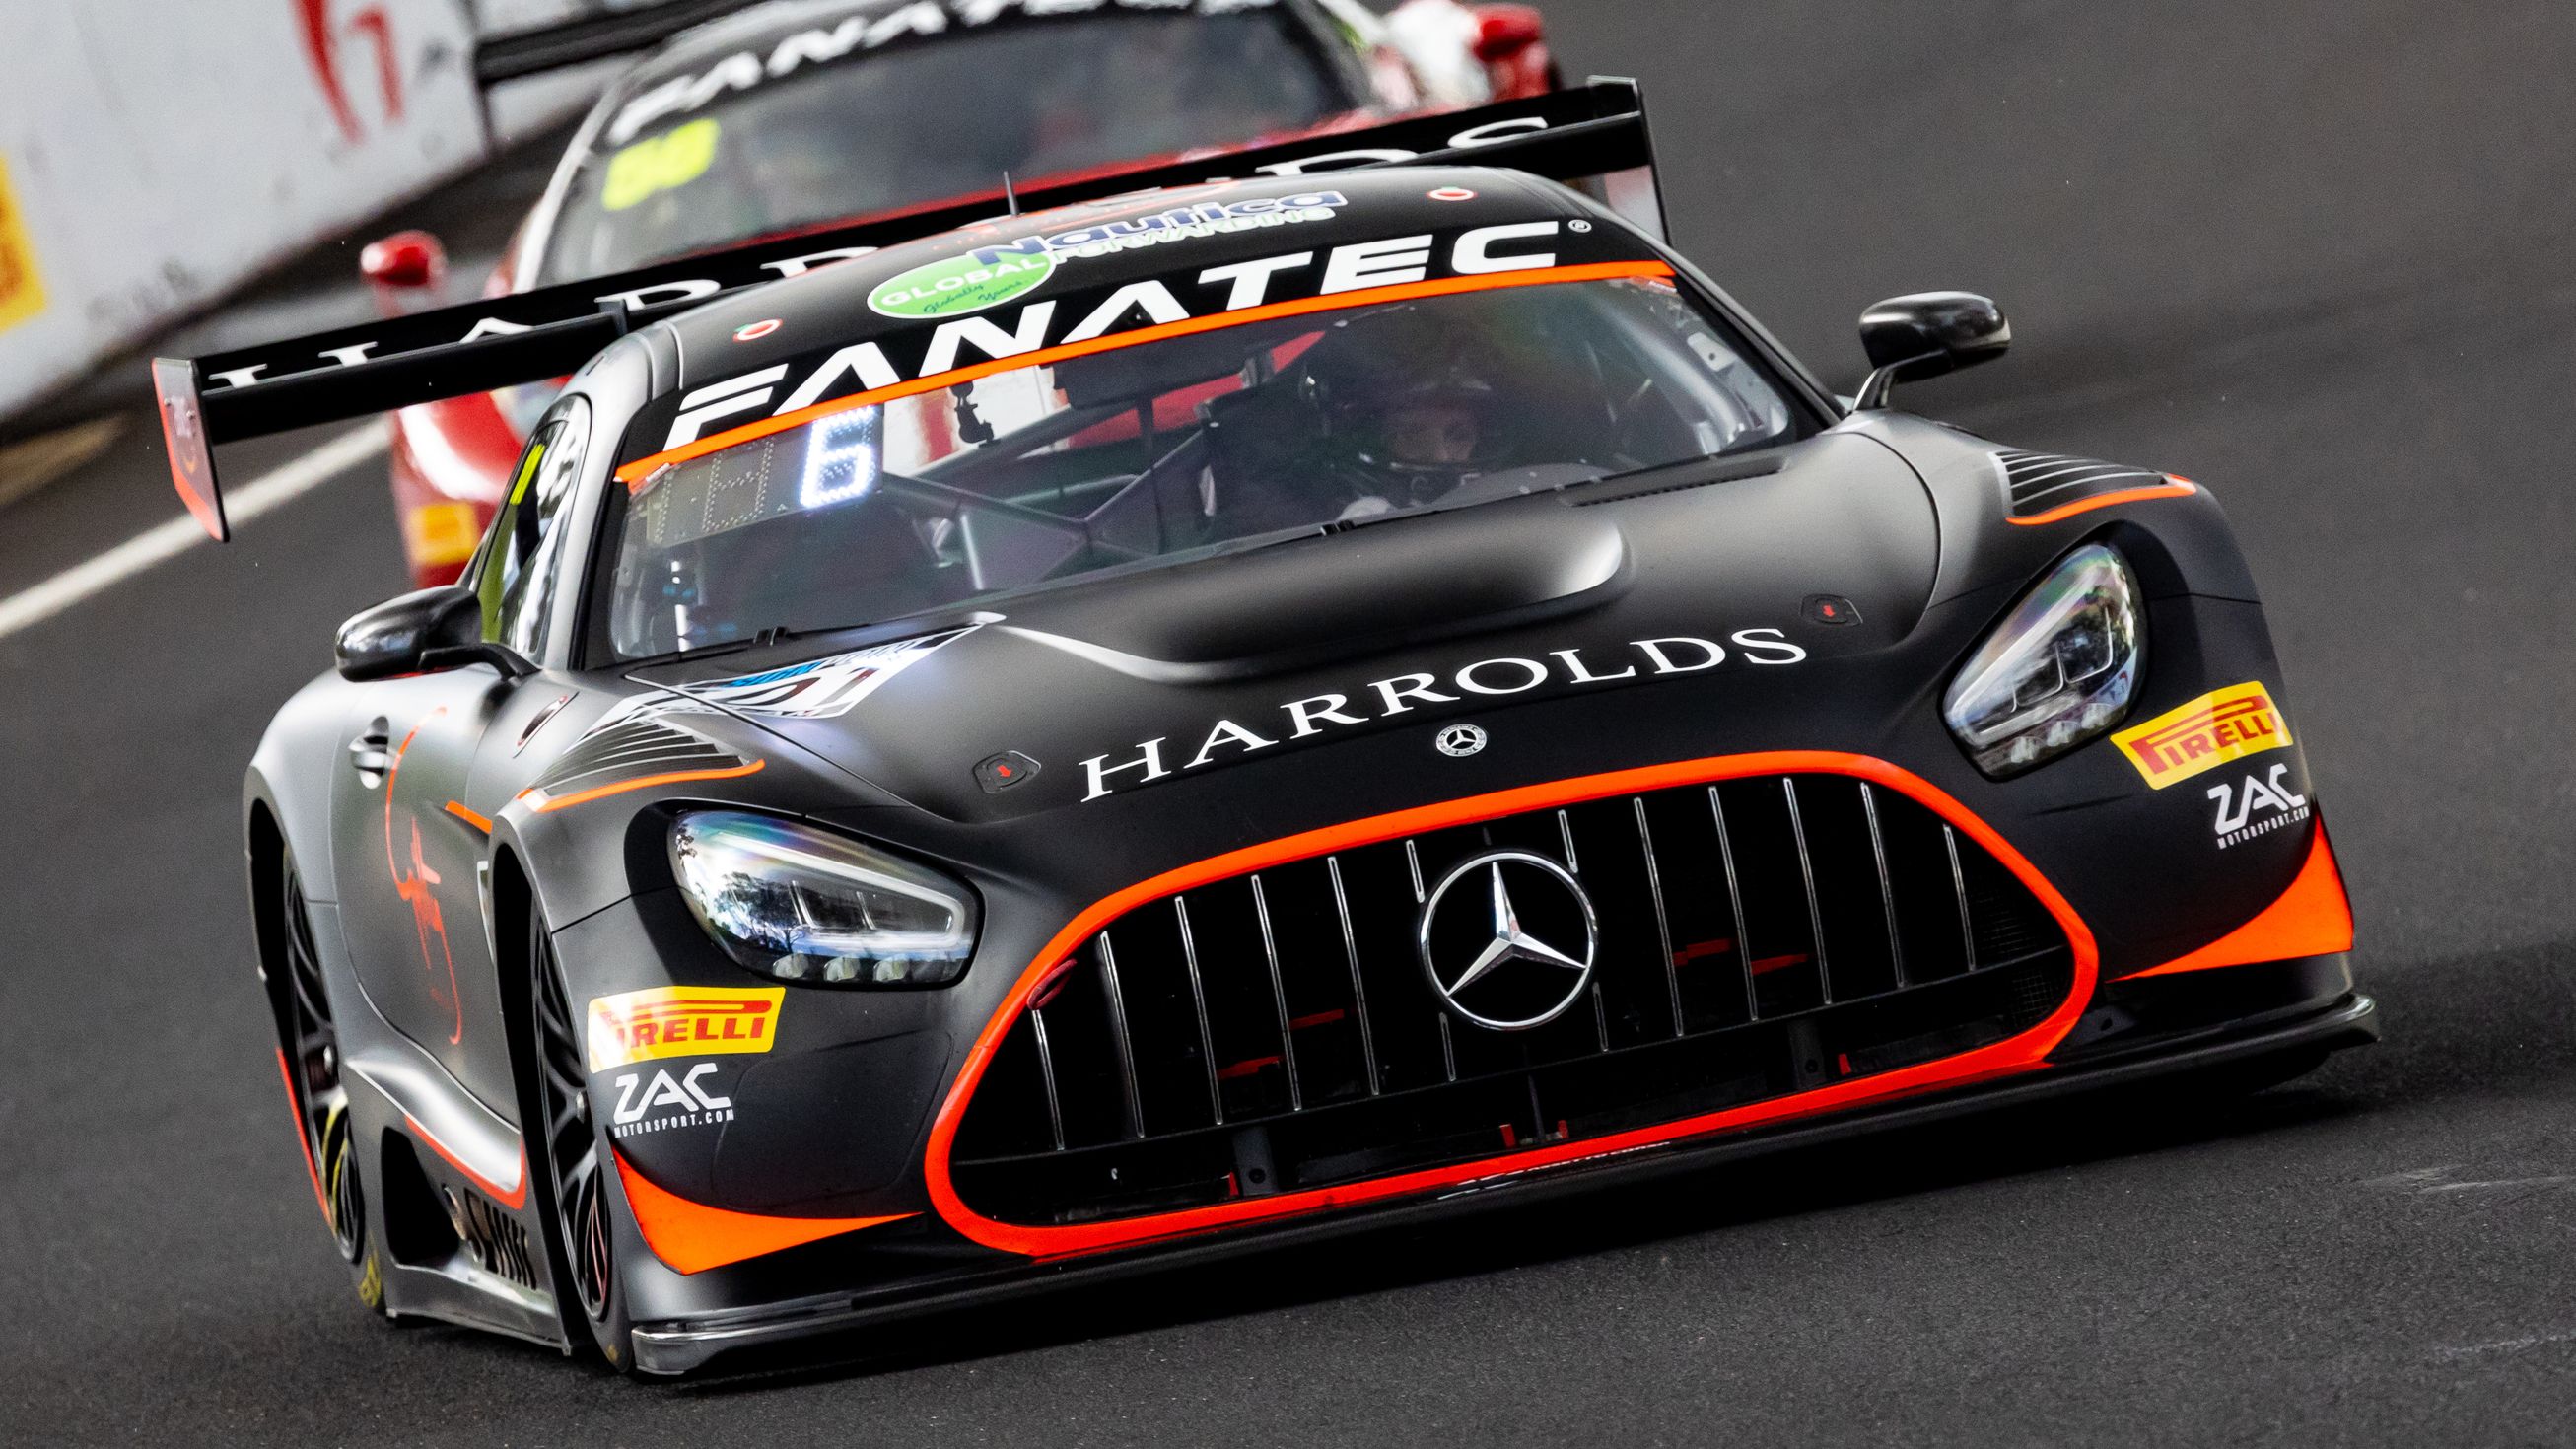 The Mercedes-AMG GT3 that Jayden Ojeda will race with Ross Poulakis.